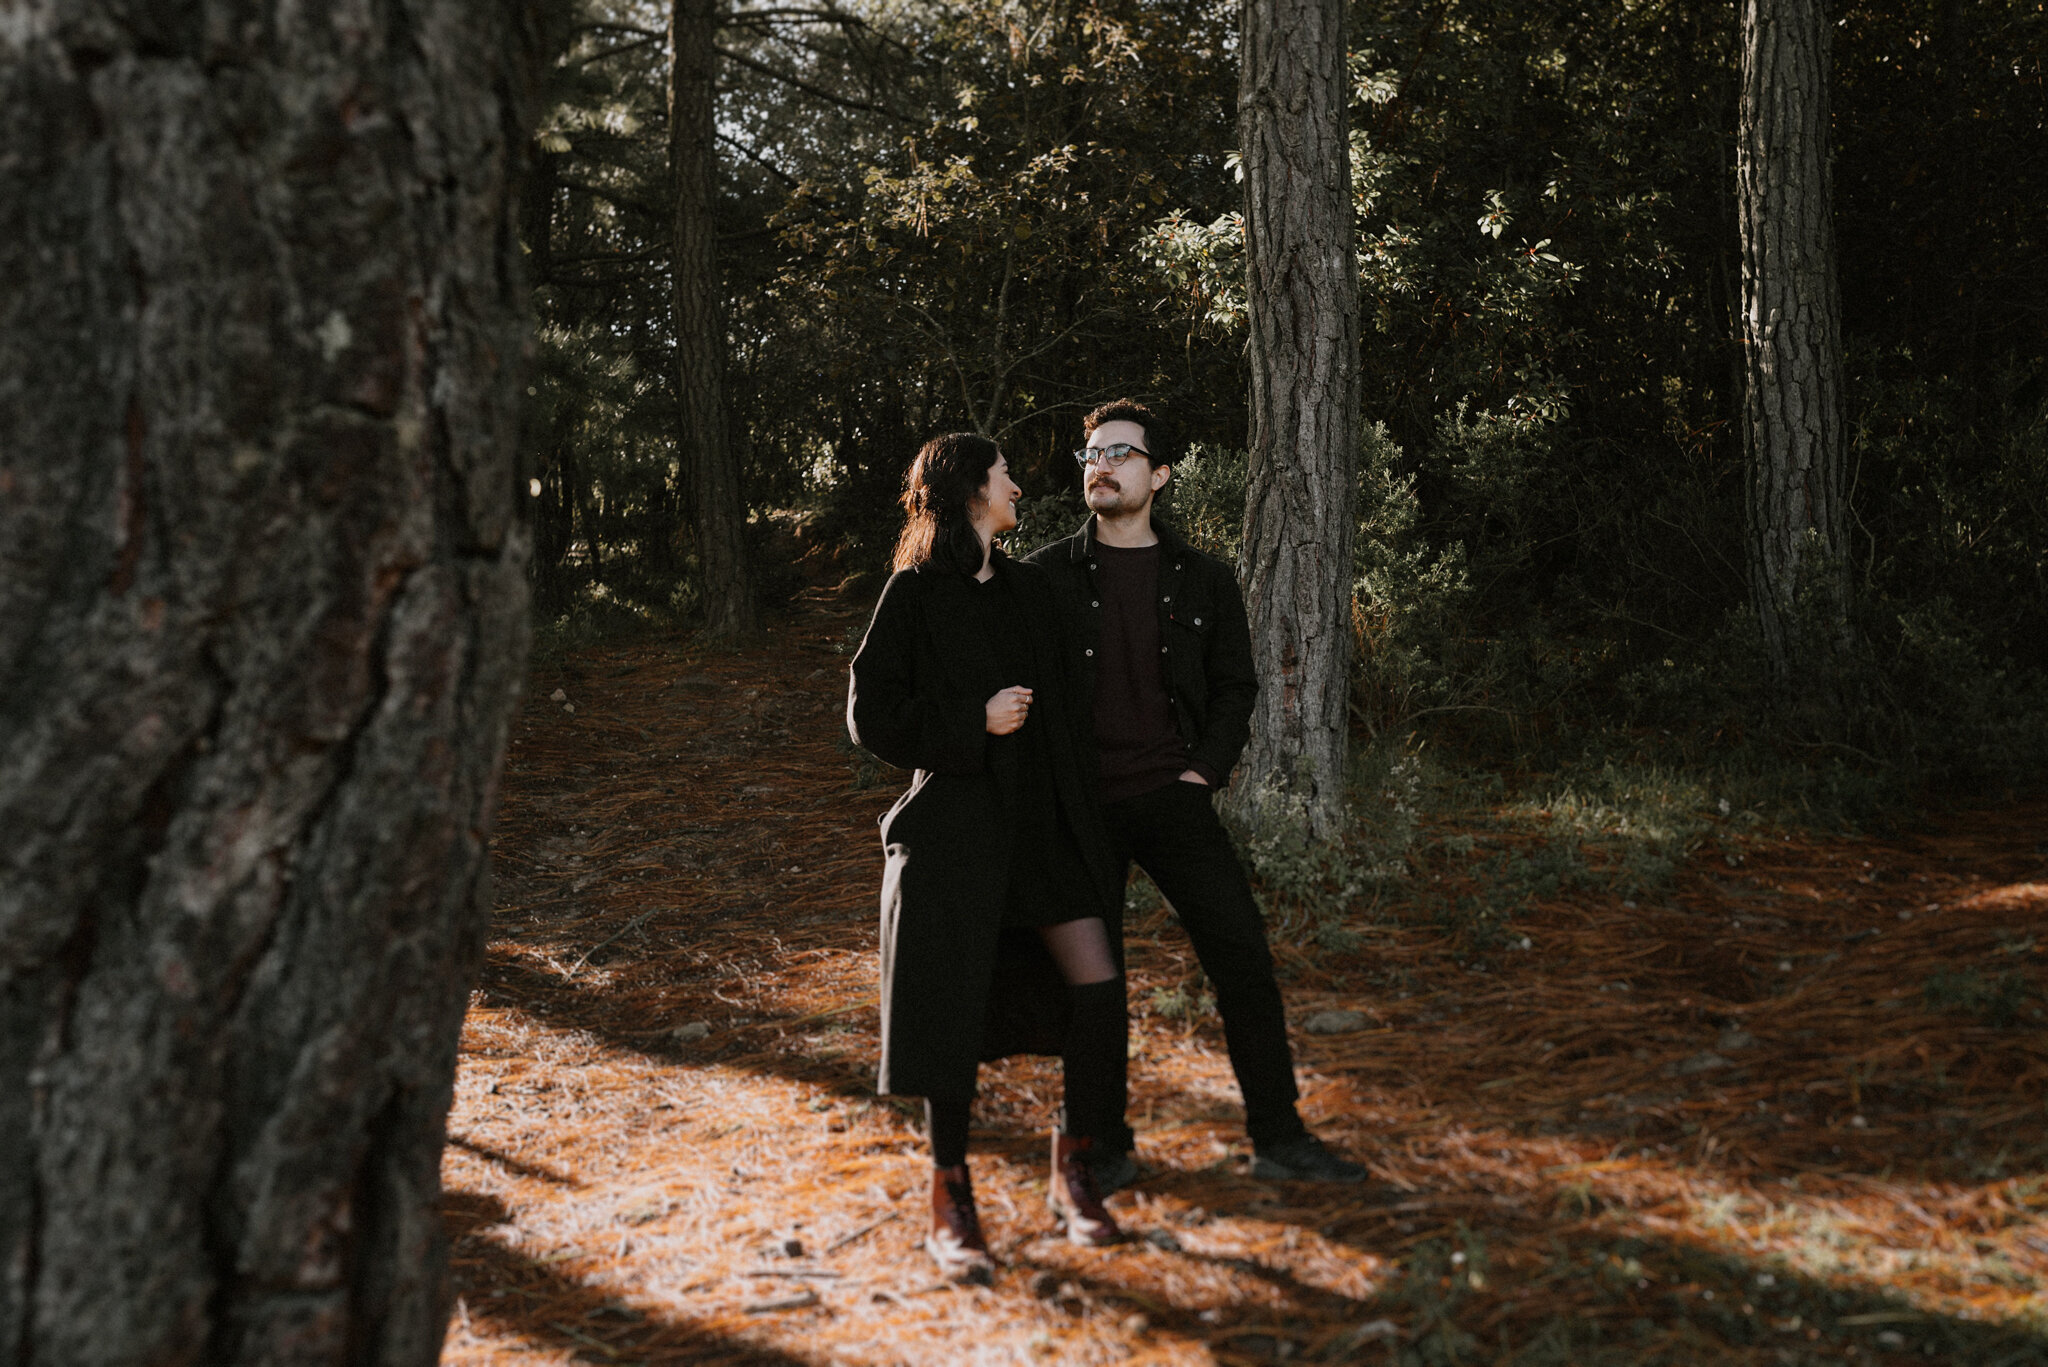 MEXICO COUPLE SESSION - IN THE WOODS - ANNA SAUZA PHOTOGRAPHY -48.jpg